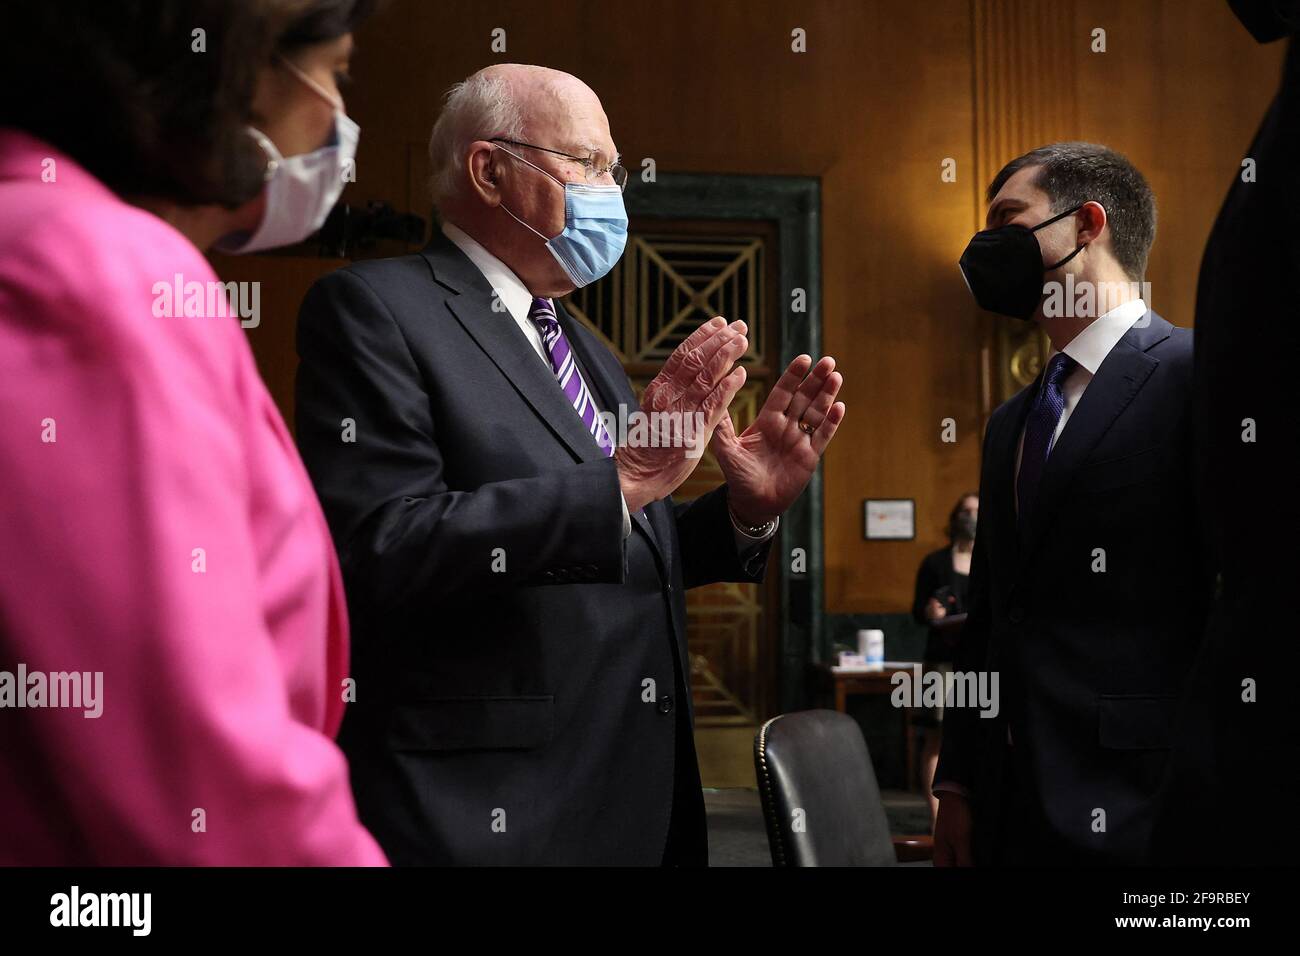 (L-R) Commerce Secretary Gina Raimondo, Senate Appropriations Committee Chairman Patrick Leahy (D-VT) and Transportation Secretary Pete Buttigieg talk before a committee hearing in the Dirksen Senate Office Building on Capitol Hill on April 20, 2021 in Washington, DC. Members of President Biden's cabinet are testifying about the American Jobs Plan, the administration's $2.3 trillion infrastructure plan that has yet to win over a single Republican in Congress. Photo by Chip Somodevilla/Pool/ABACAPRESS.COM Stock Photo